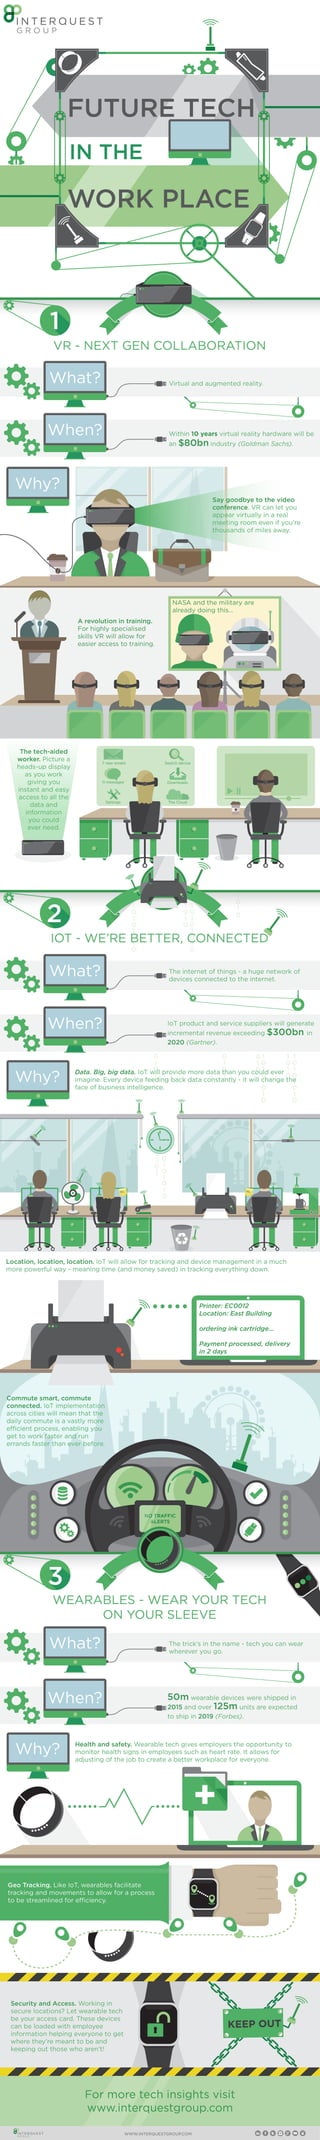 [Infographic] Future Tech In The Workplace